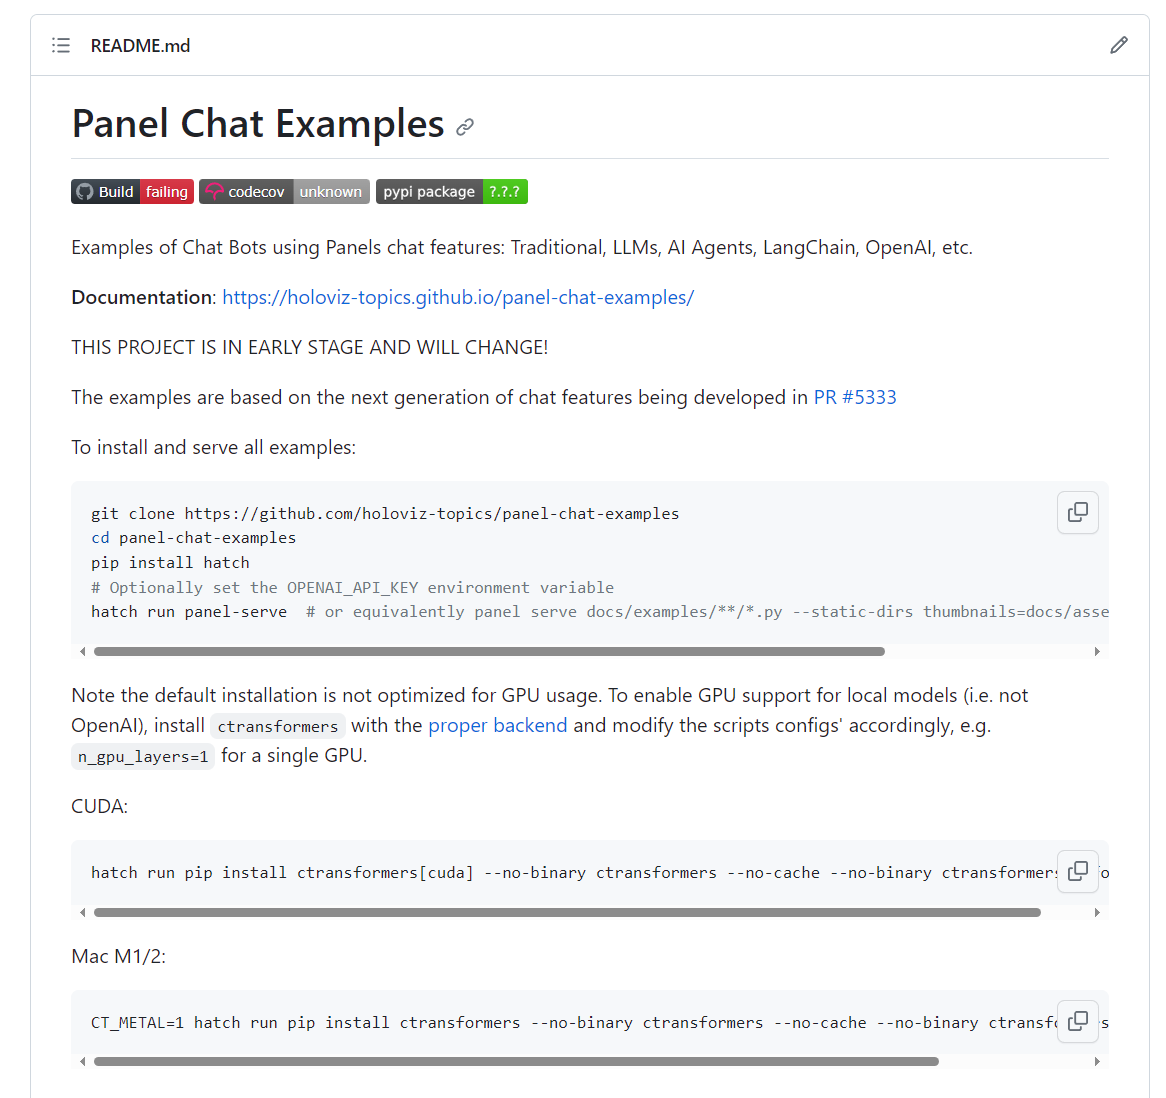 panel-chat-examples-gallery